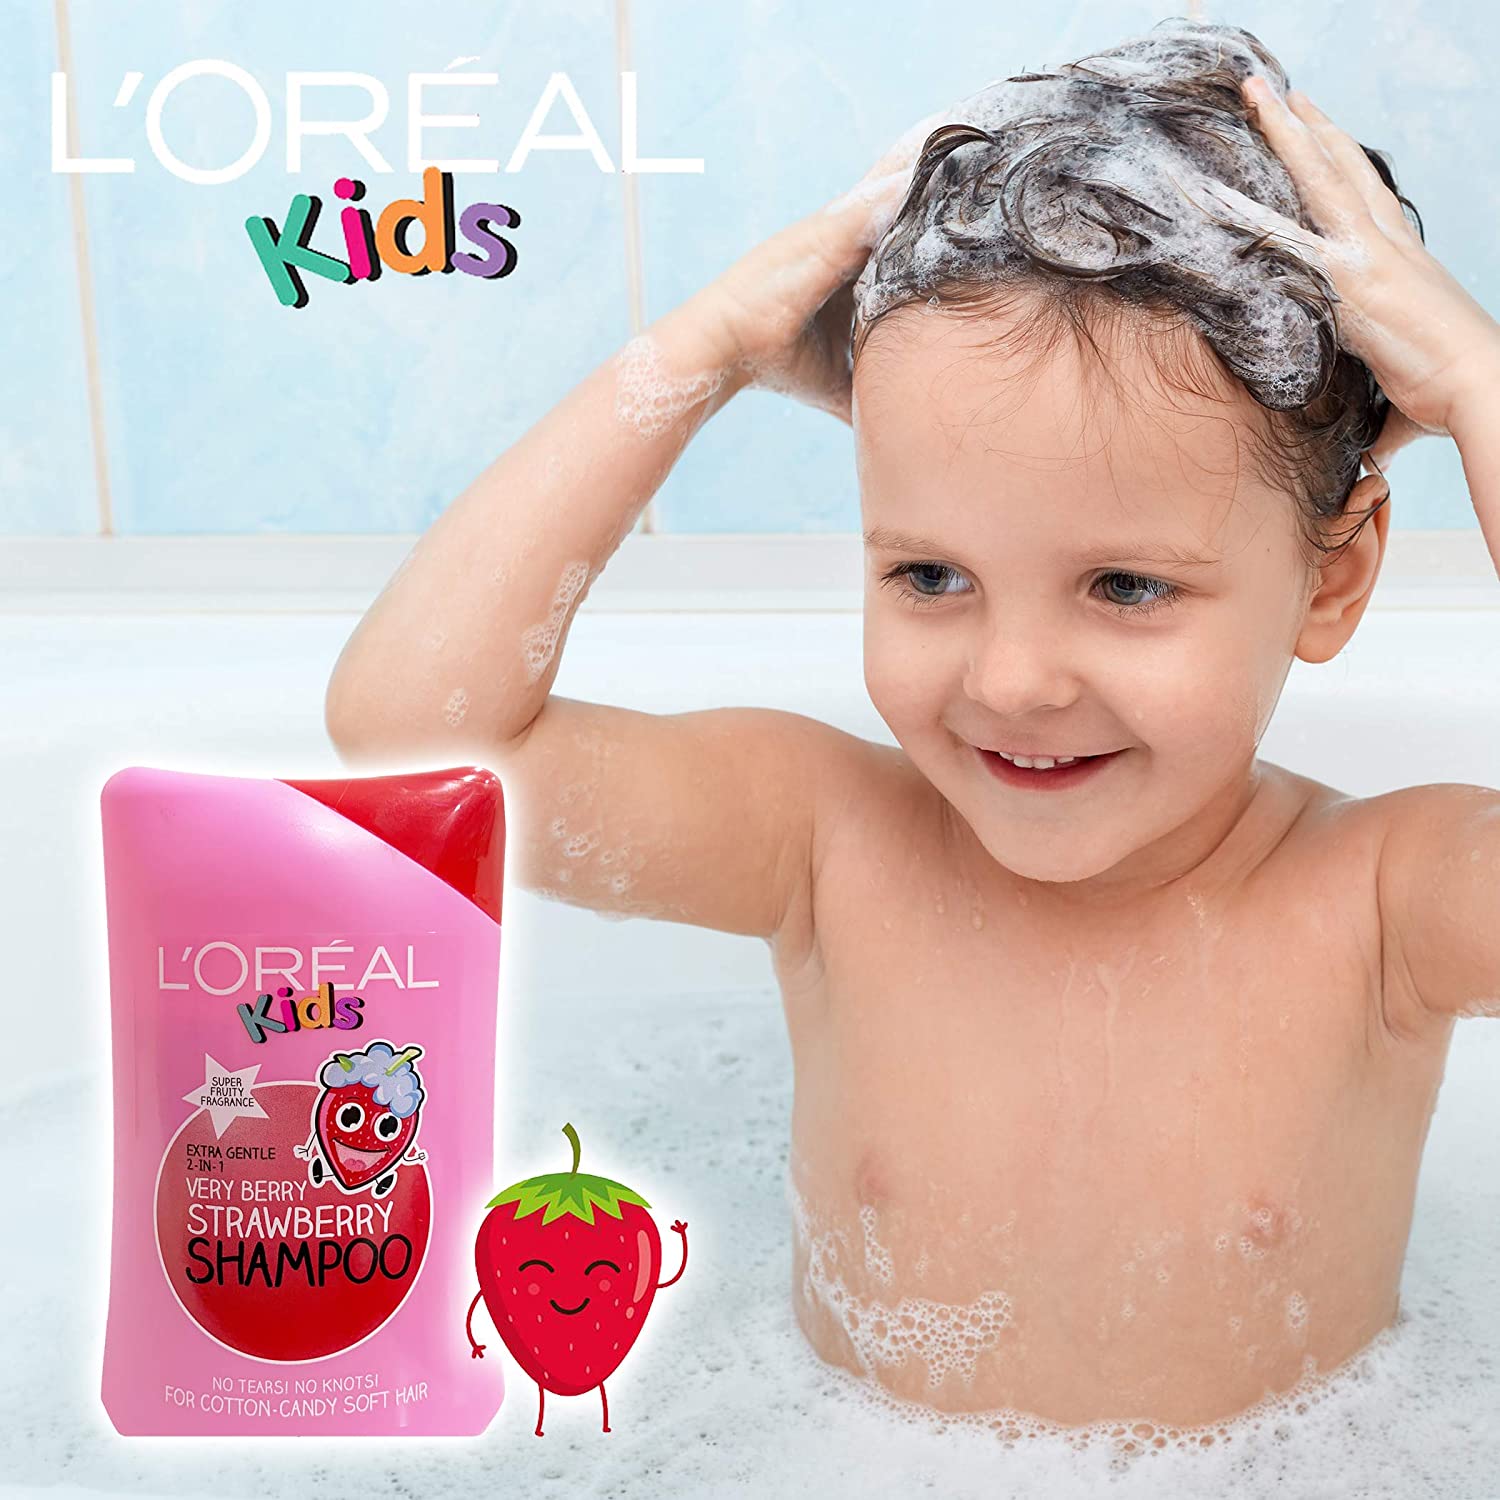 Loreal Kids Very Berry Strawberry Shampoo Extra Gentle 2-in-1 250 ml